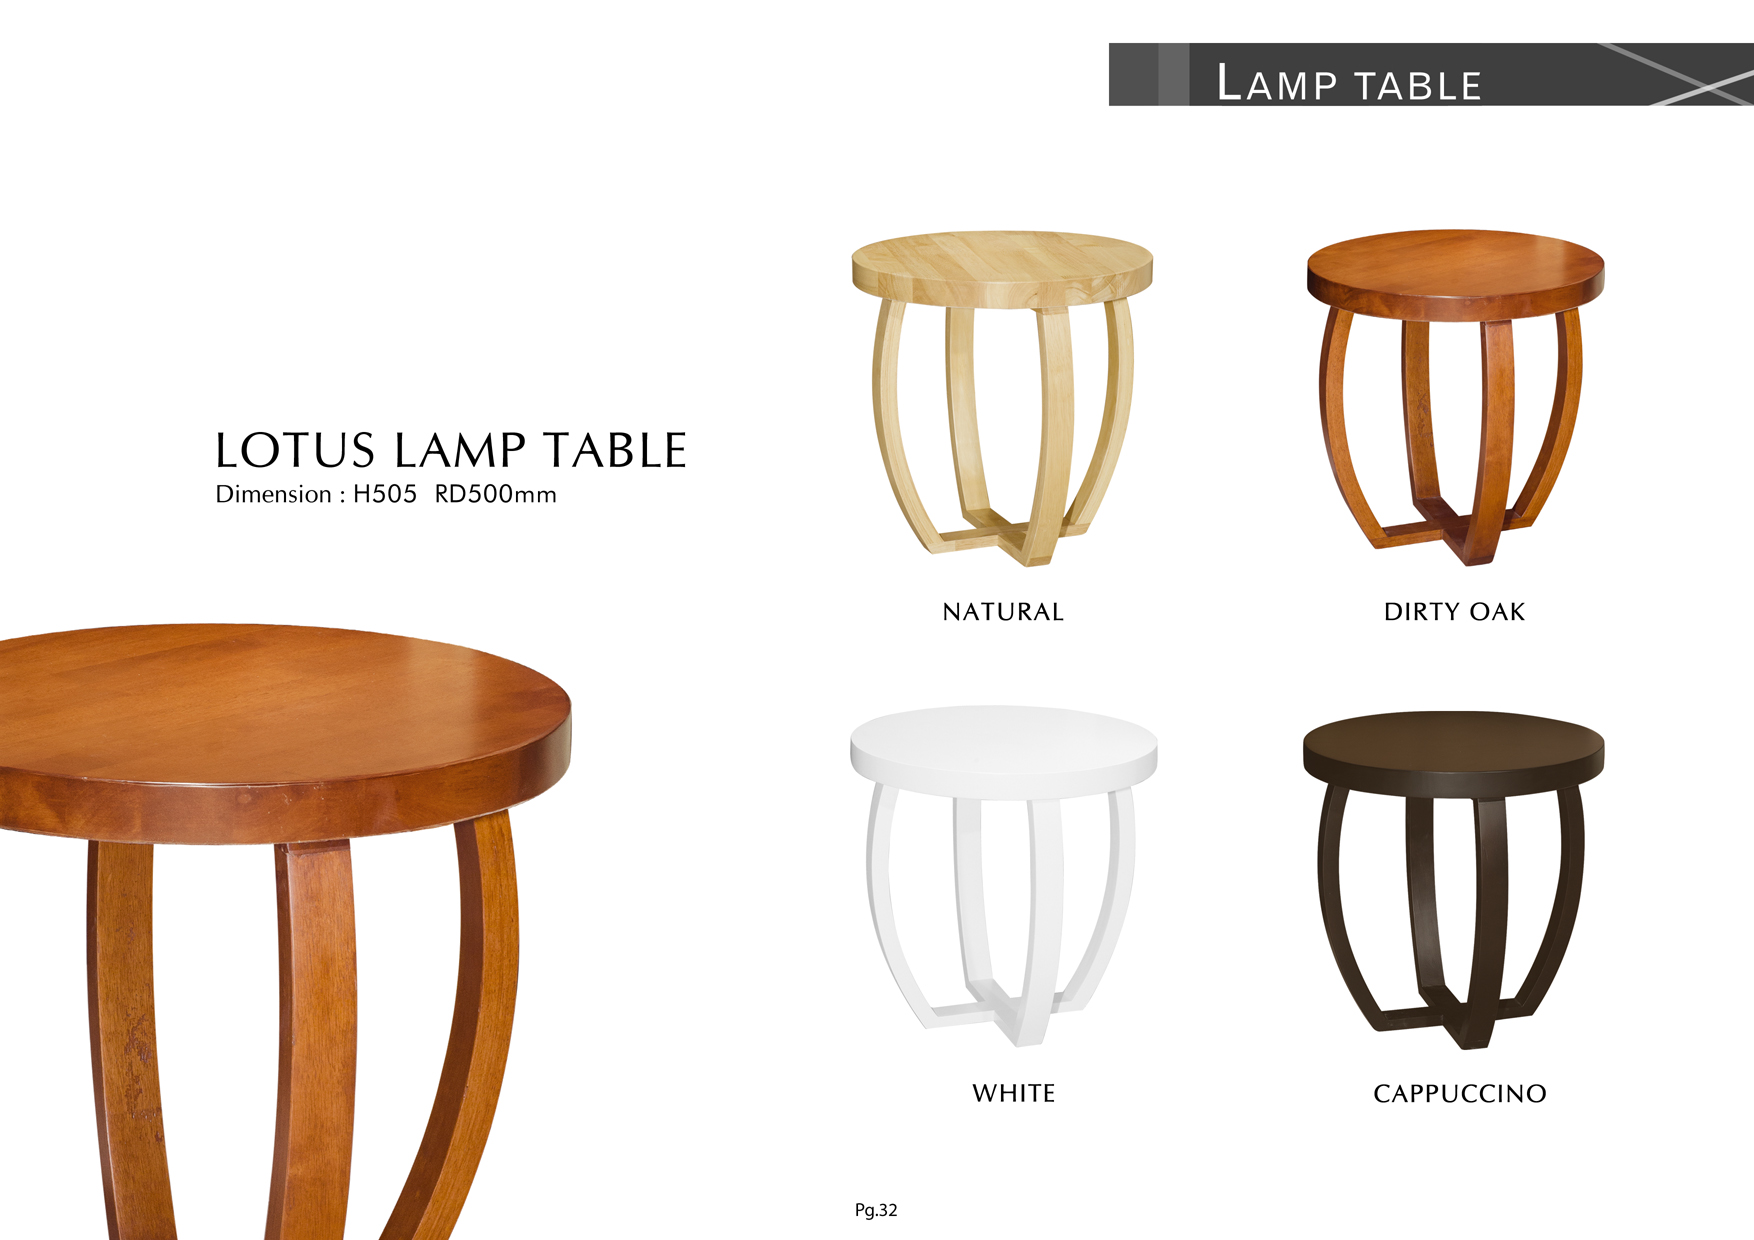 Product: PG32. LOTUS LAMP TABLE